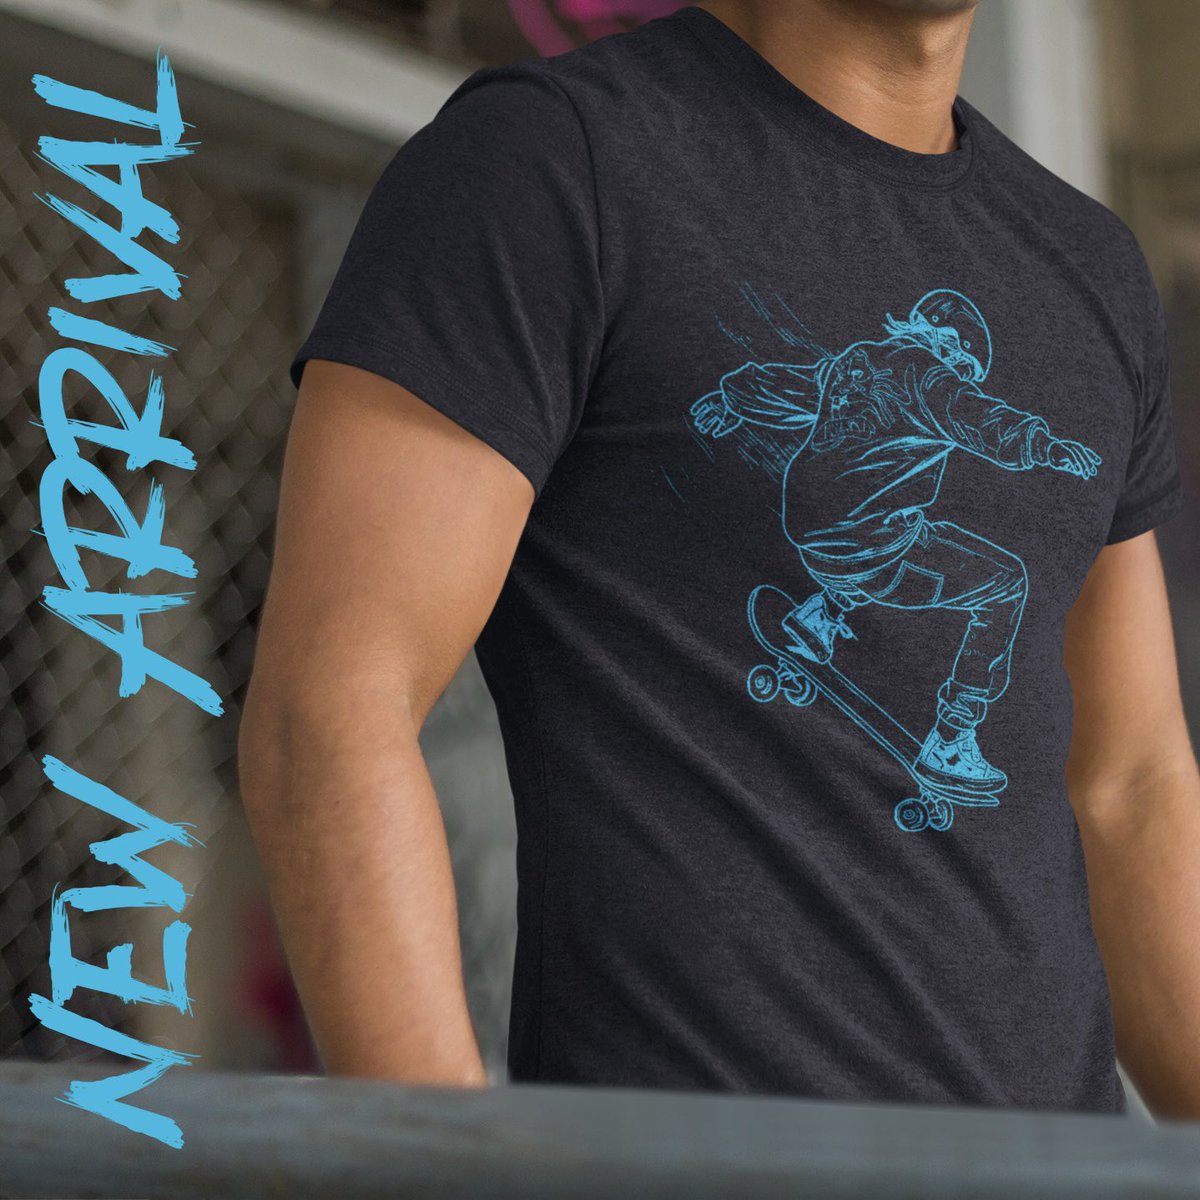 🛹 Get ready to roll in style with our awesome new skateboarding tee! 🤙 

Grab yours now at TheMaverickSouls.com 

#SkateboardingTee #SkaterStyle #Streetwear #SkateLife #SkateboardDesign #NewArrival #SkateboardingFashion #Skateboarder #the_maverick_souls